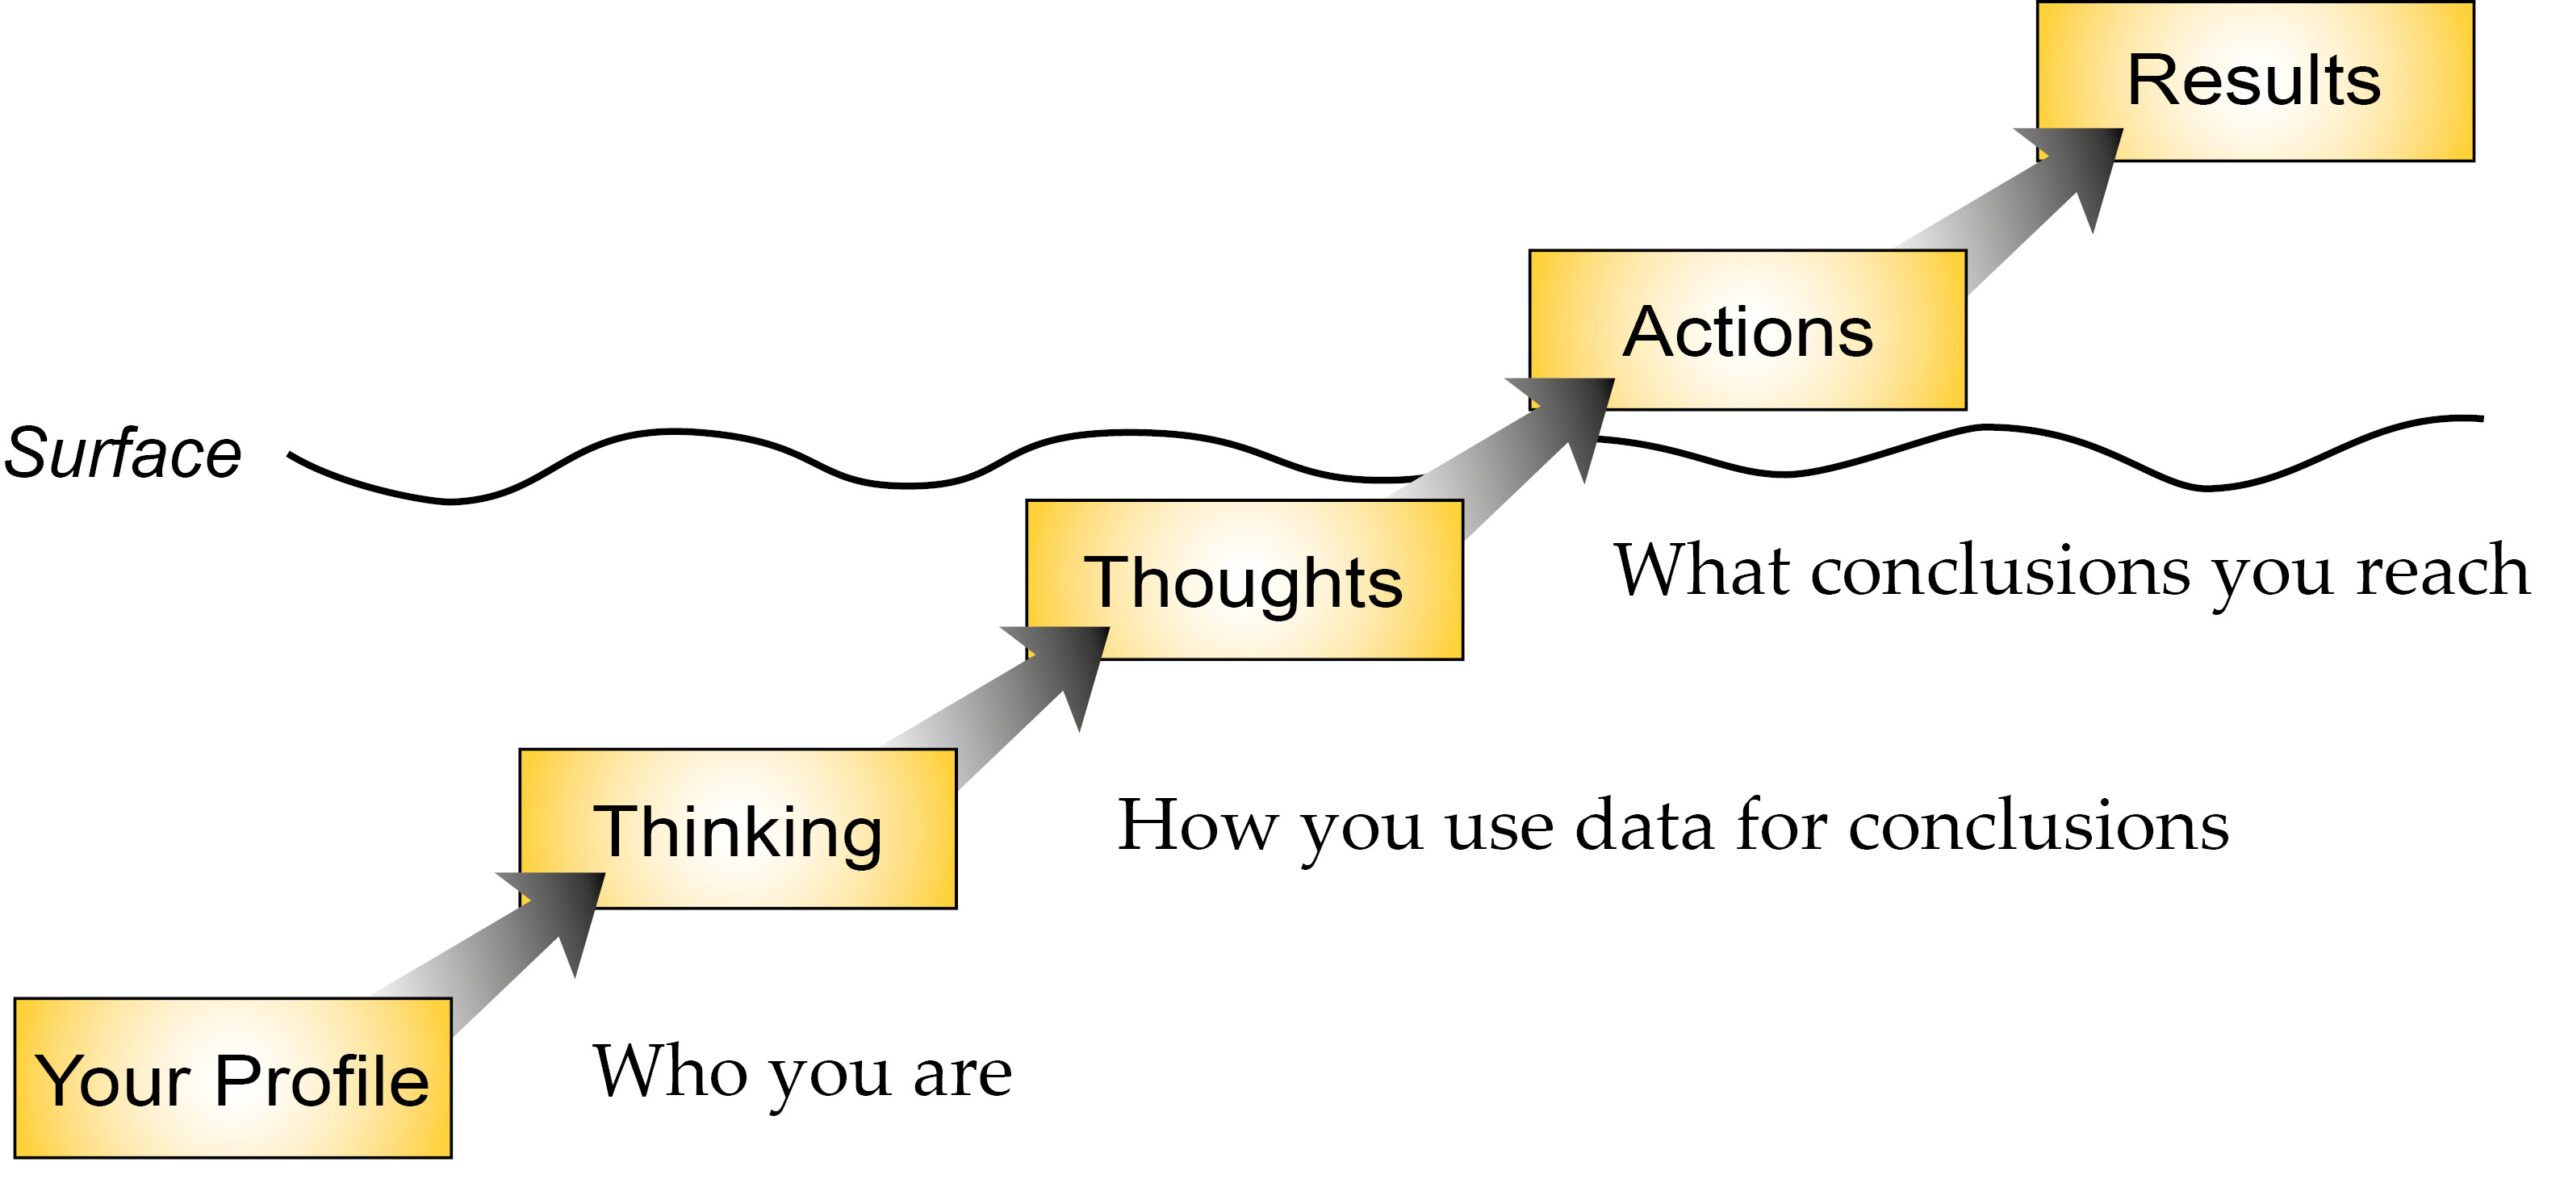 Profile - Thinking - Thoughts - Actions - Results